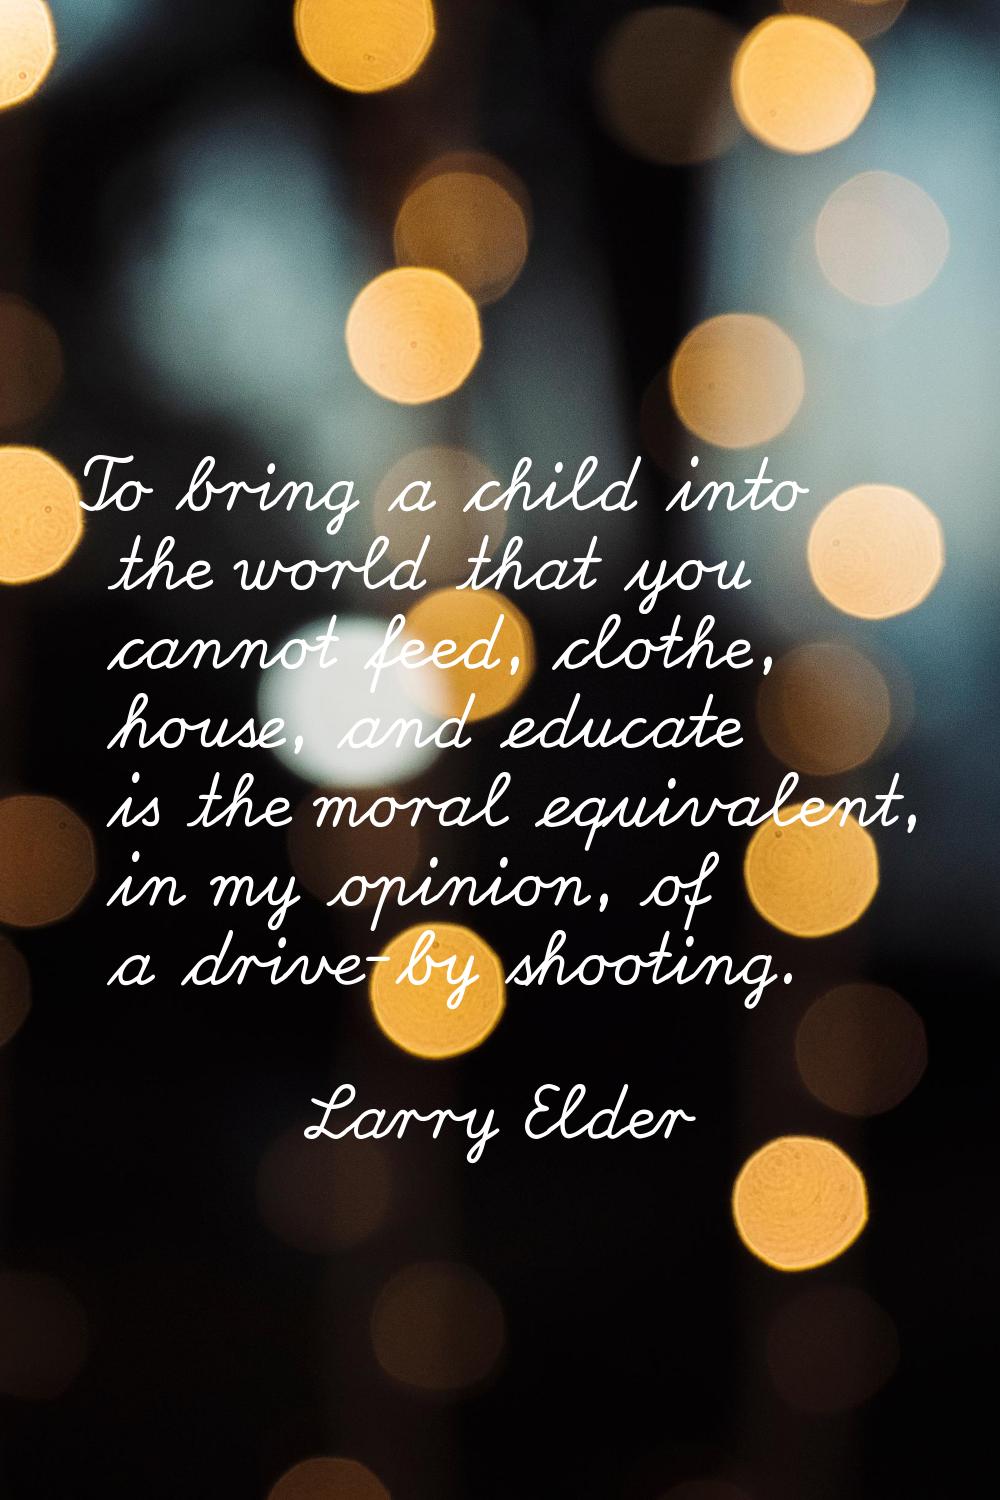 To bring a child into the world that you cannot feed, clothe, house, and educate is the moral equiv